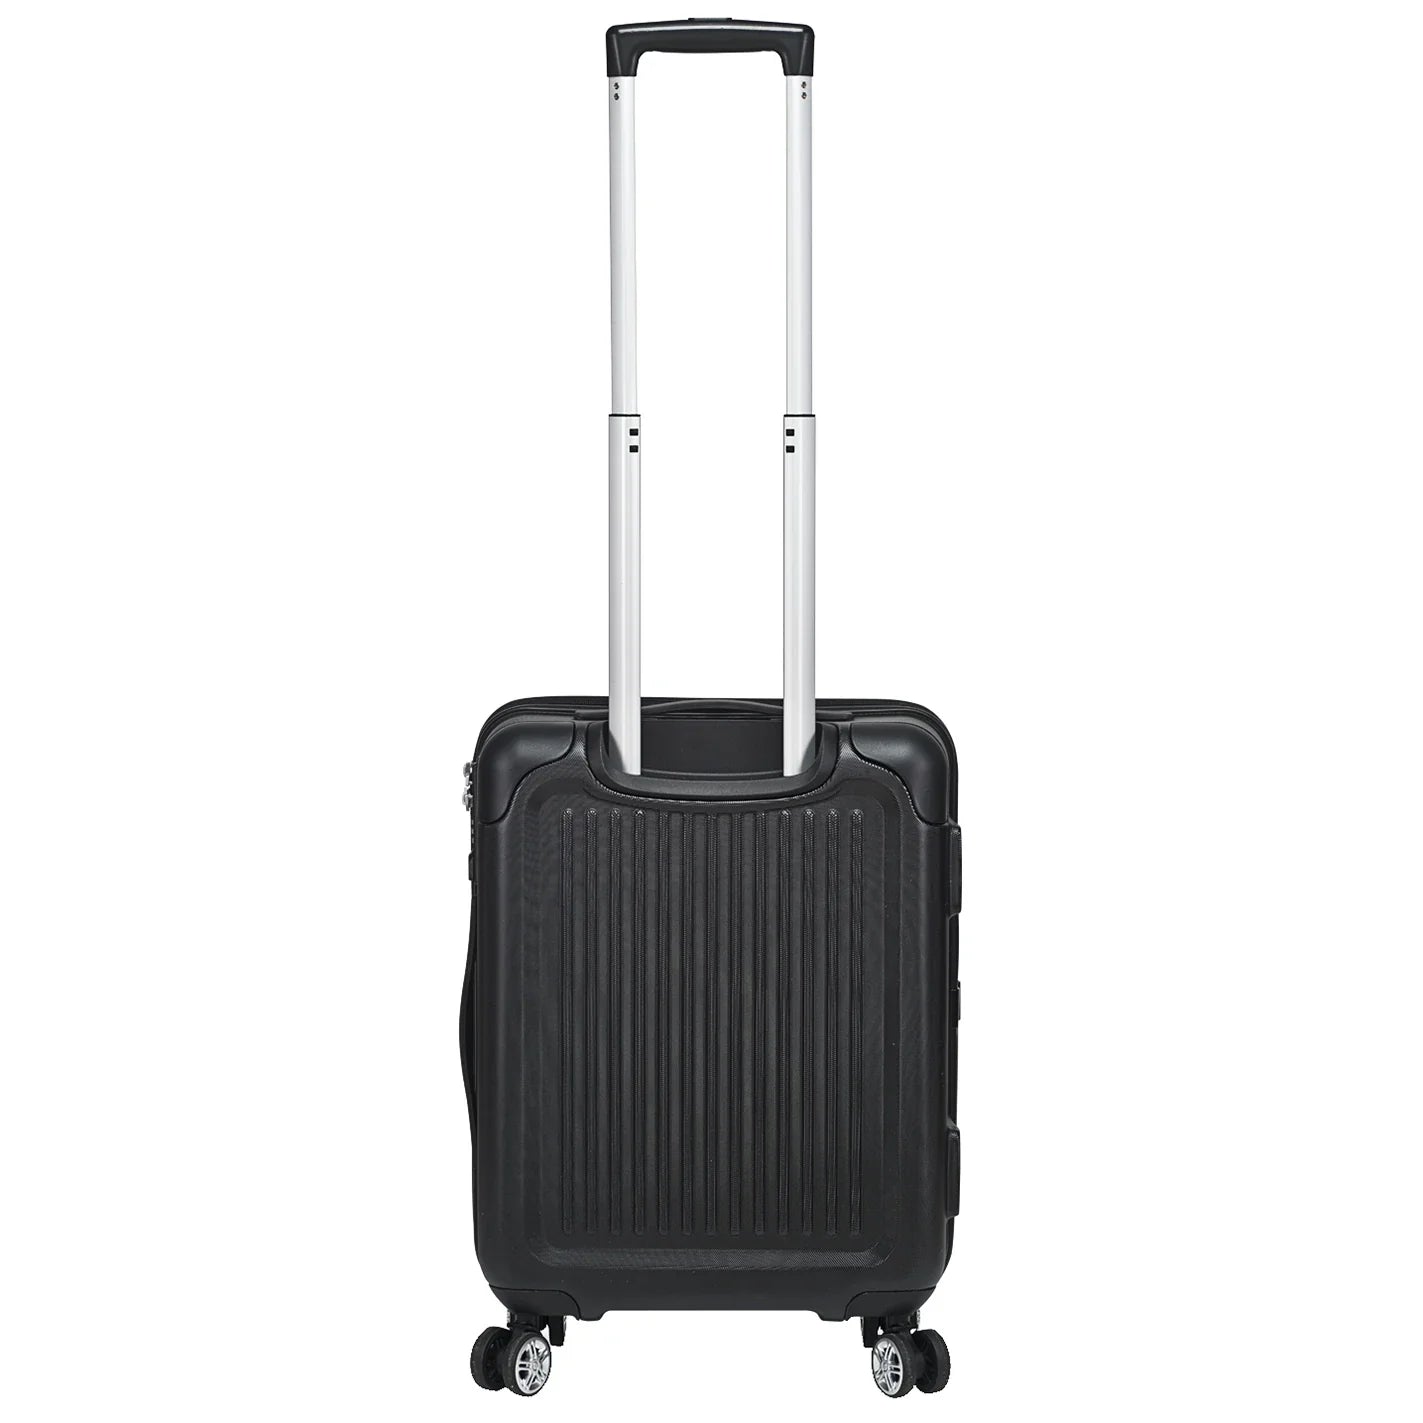 Valise cabine 4 roues Stratic Stripe 54 cm - Argent